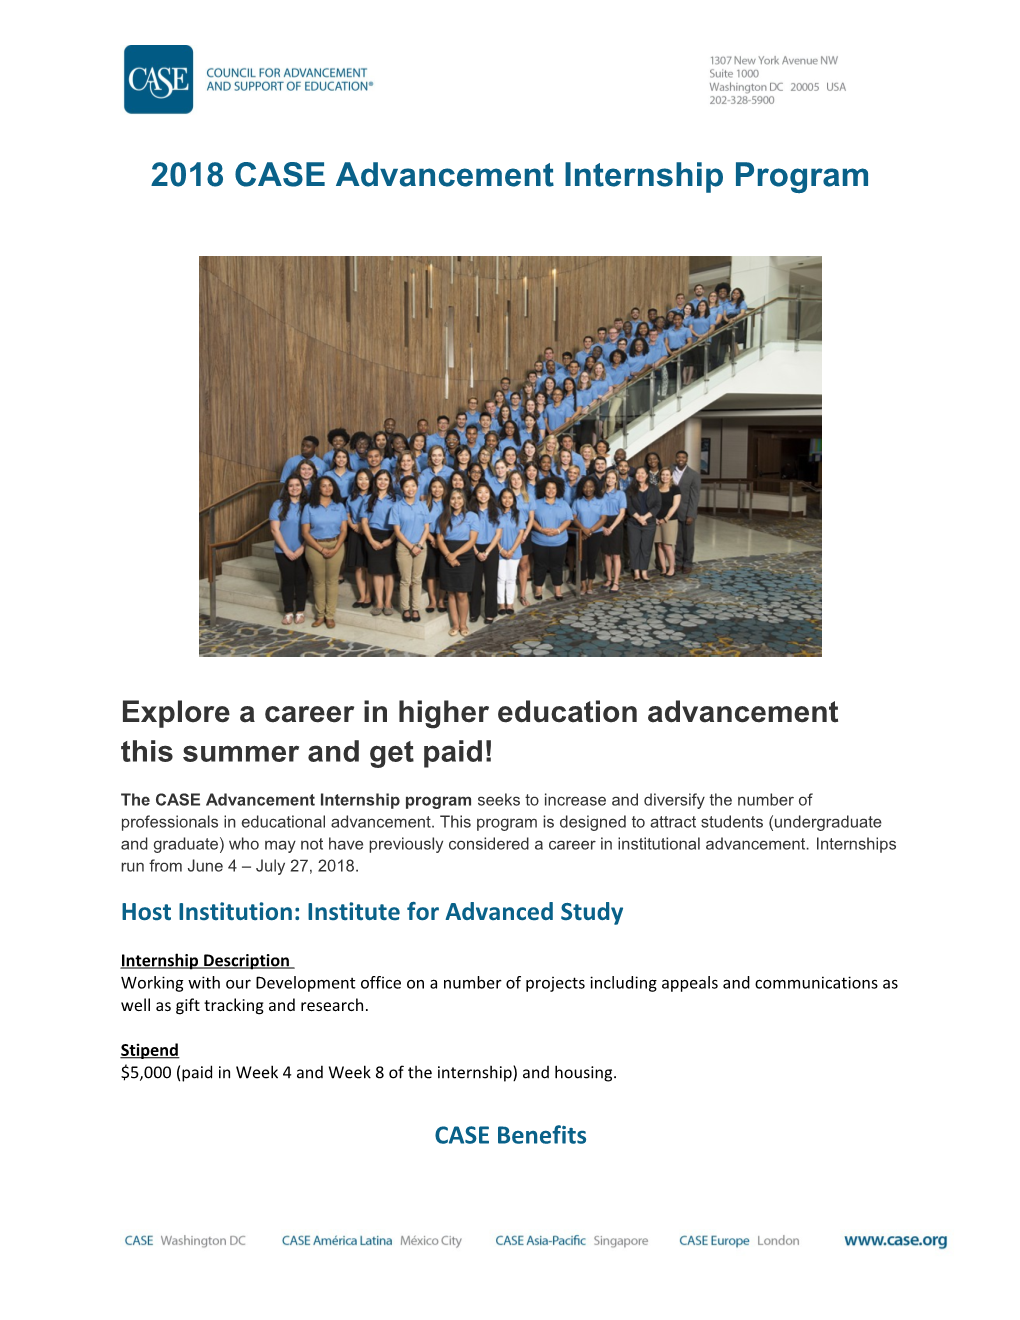 Explore a Career in Higher Education Advancement This Summer and Get Paid!